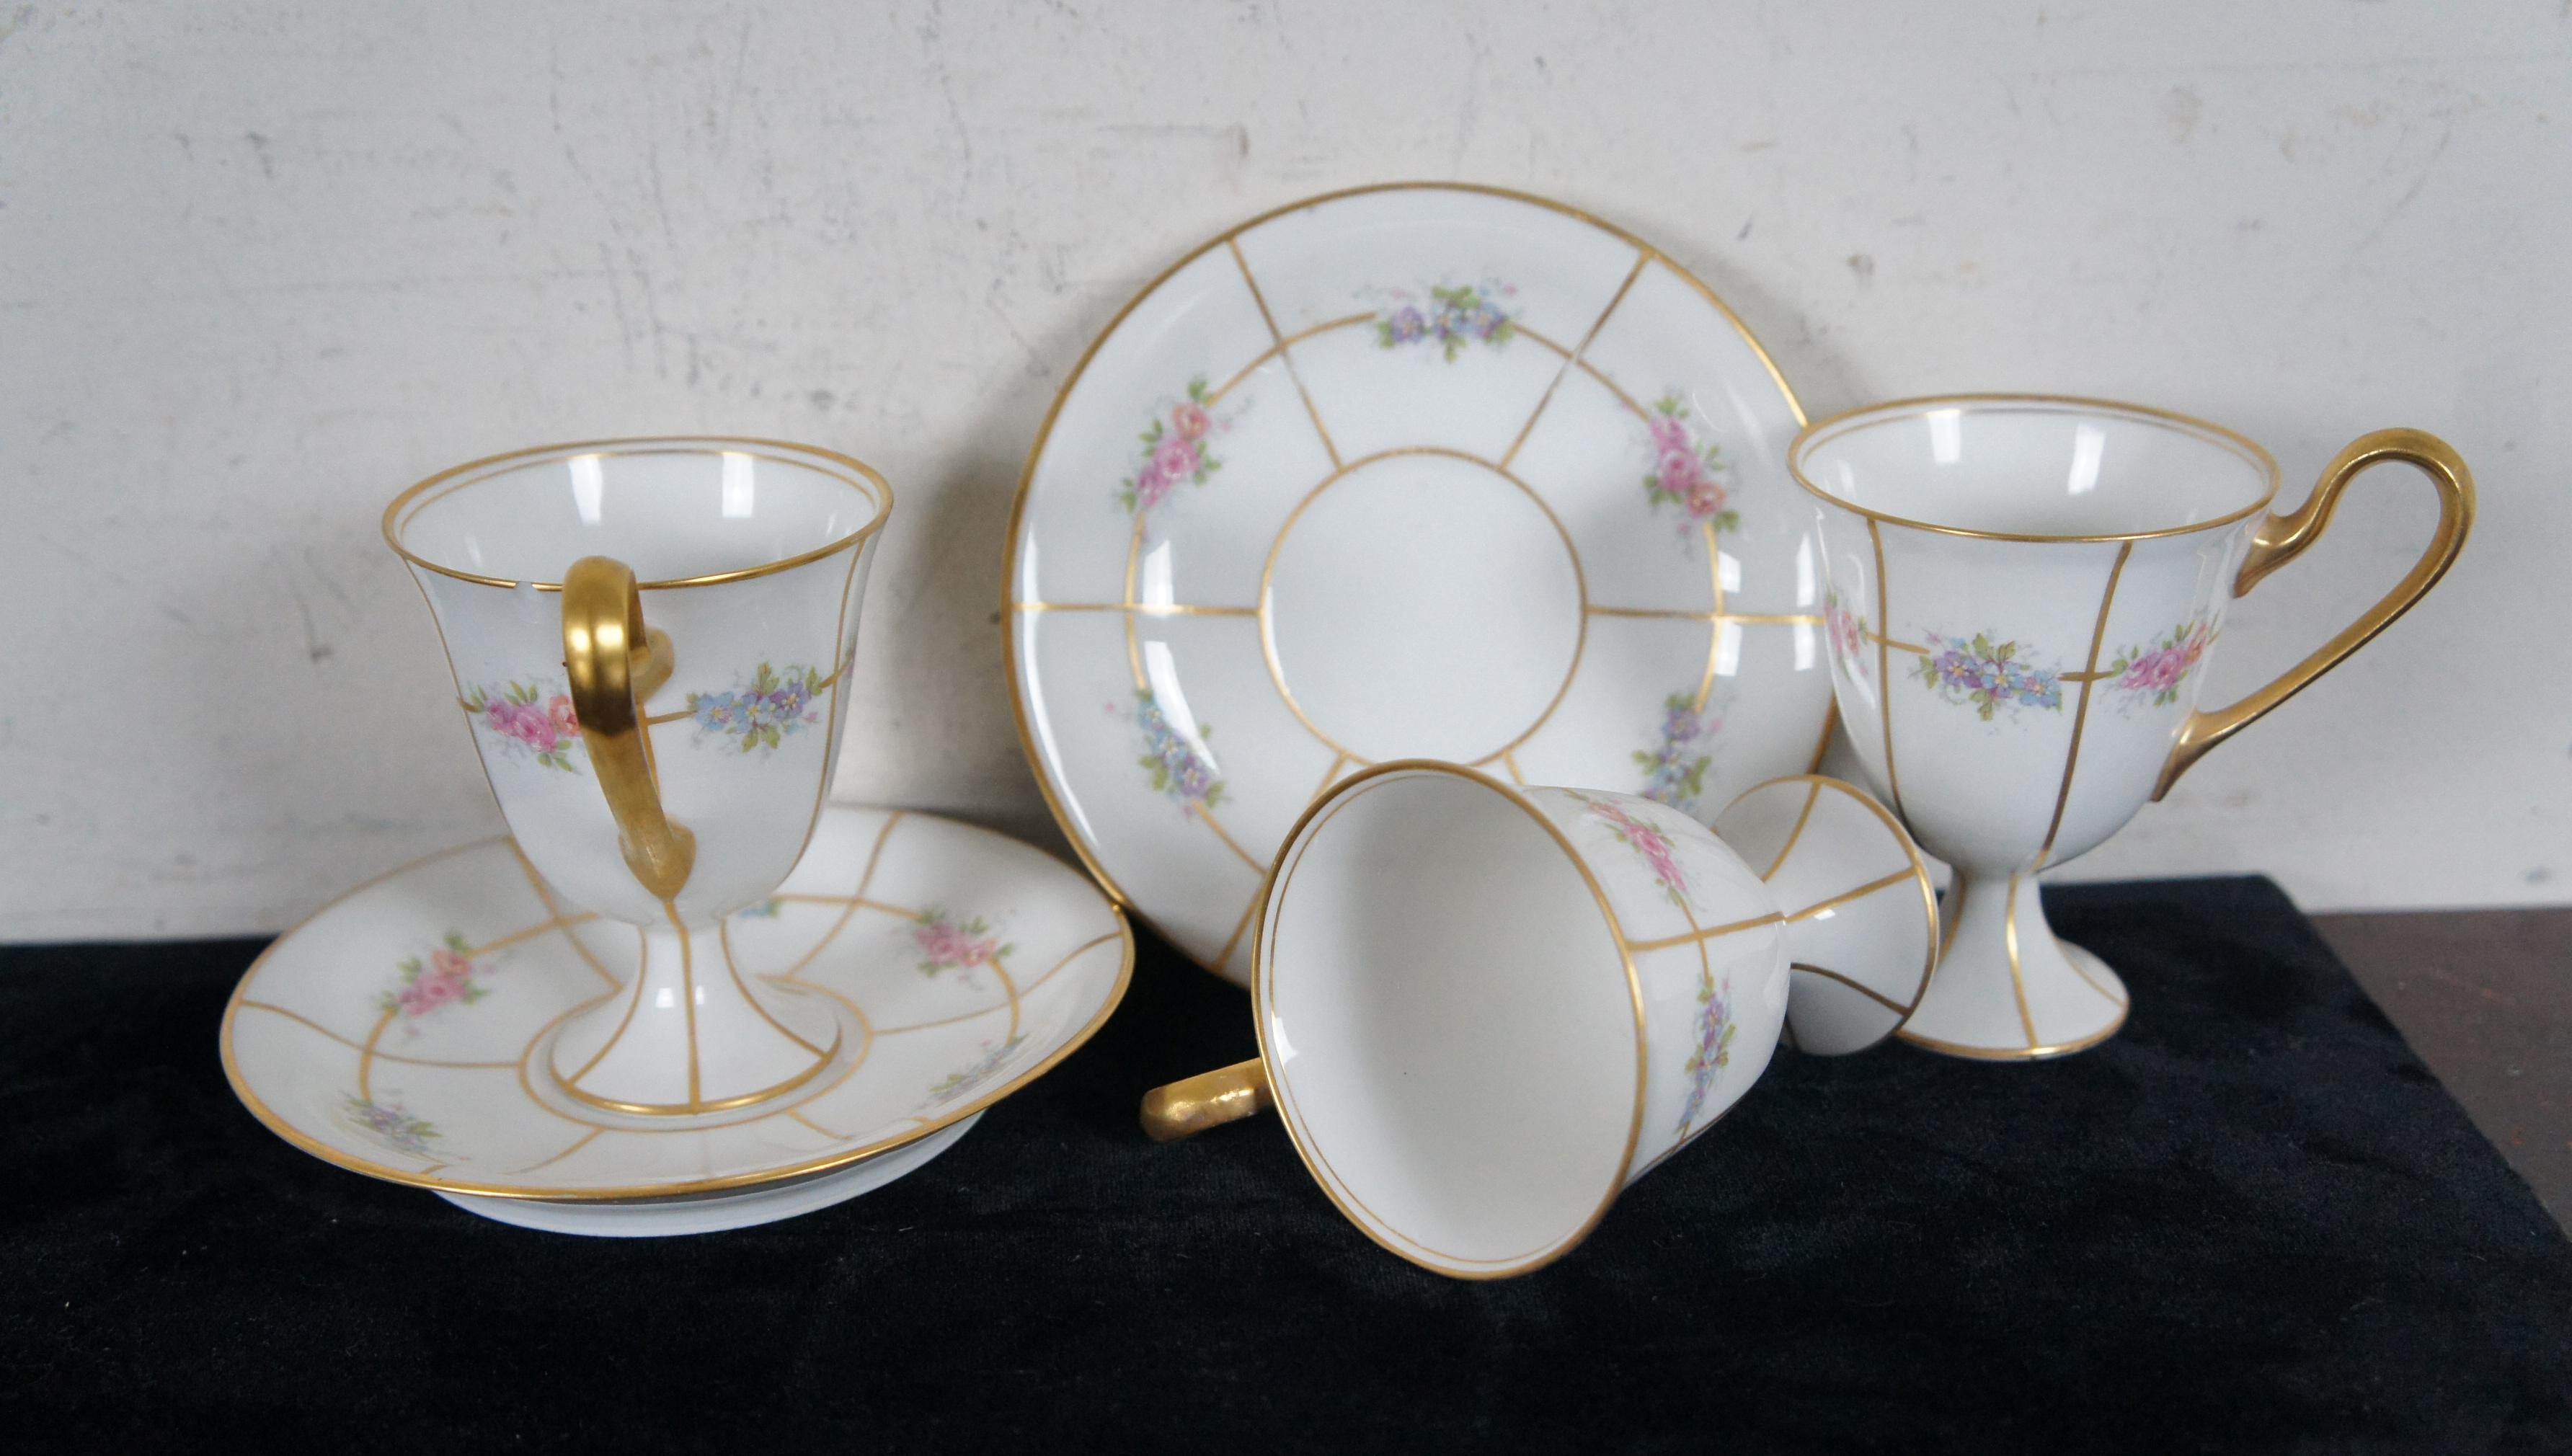 75 Antique French Jean Pouyat Limoges Porcelain China Dinner Service Set POY254 3